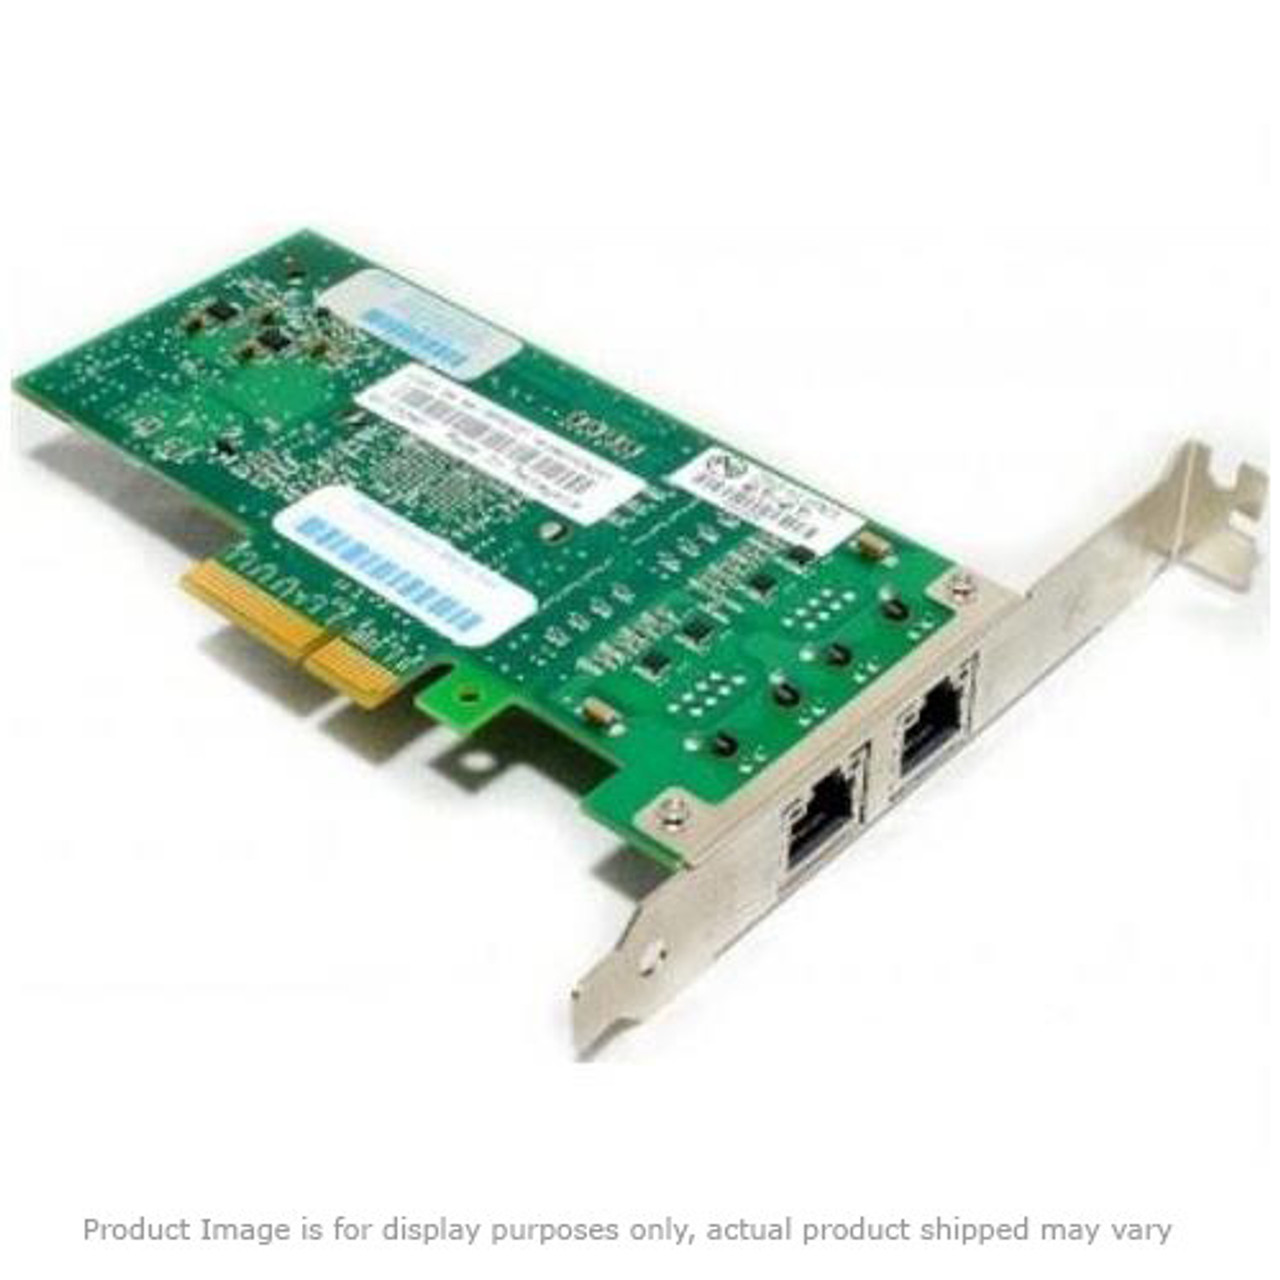 AT-1700T Allied Telesis 10Mbps ISA Network Adapter